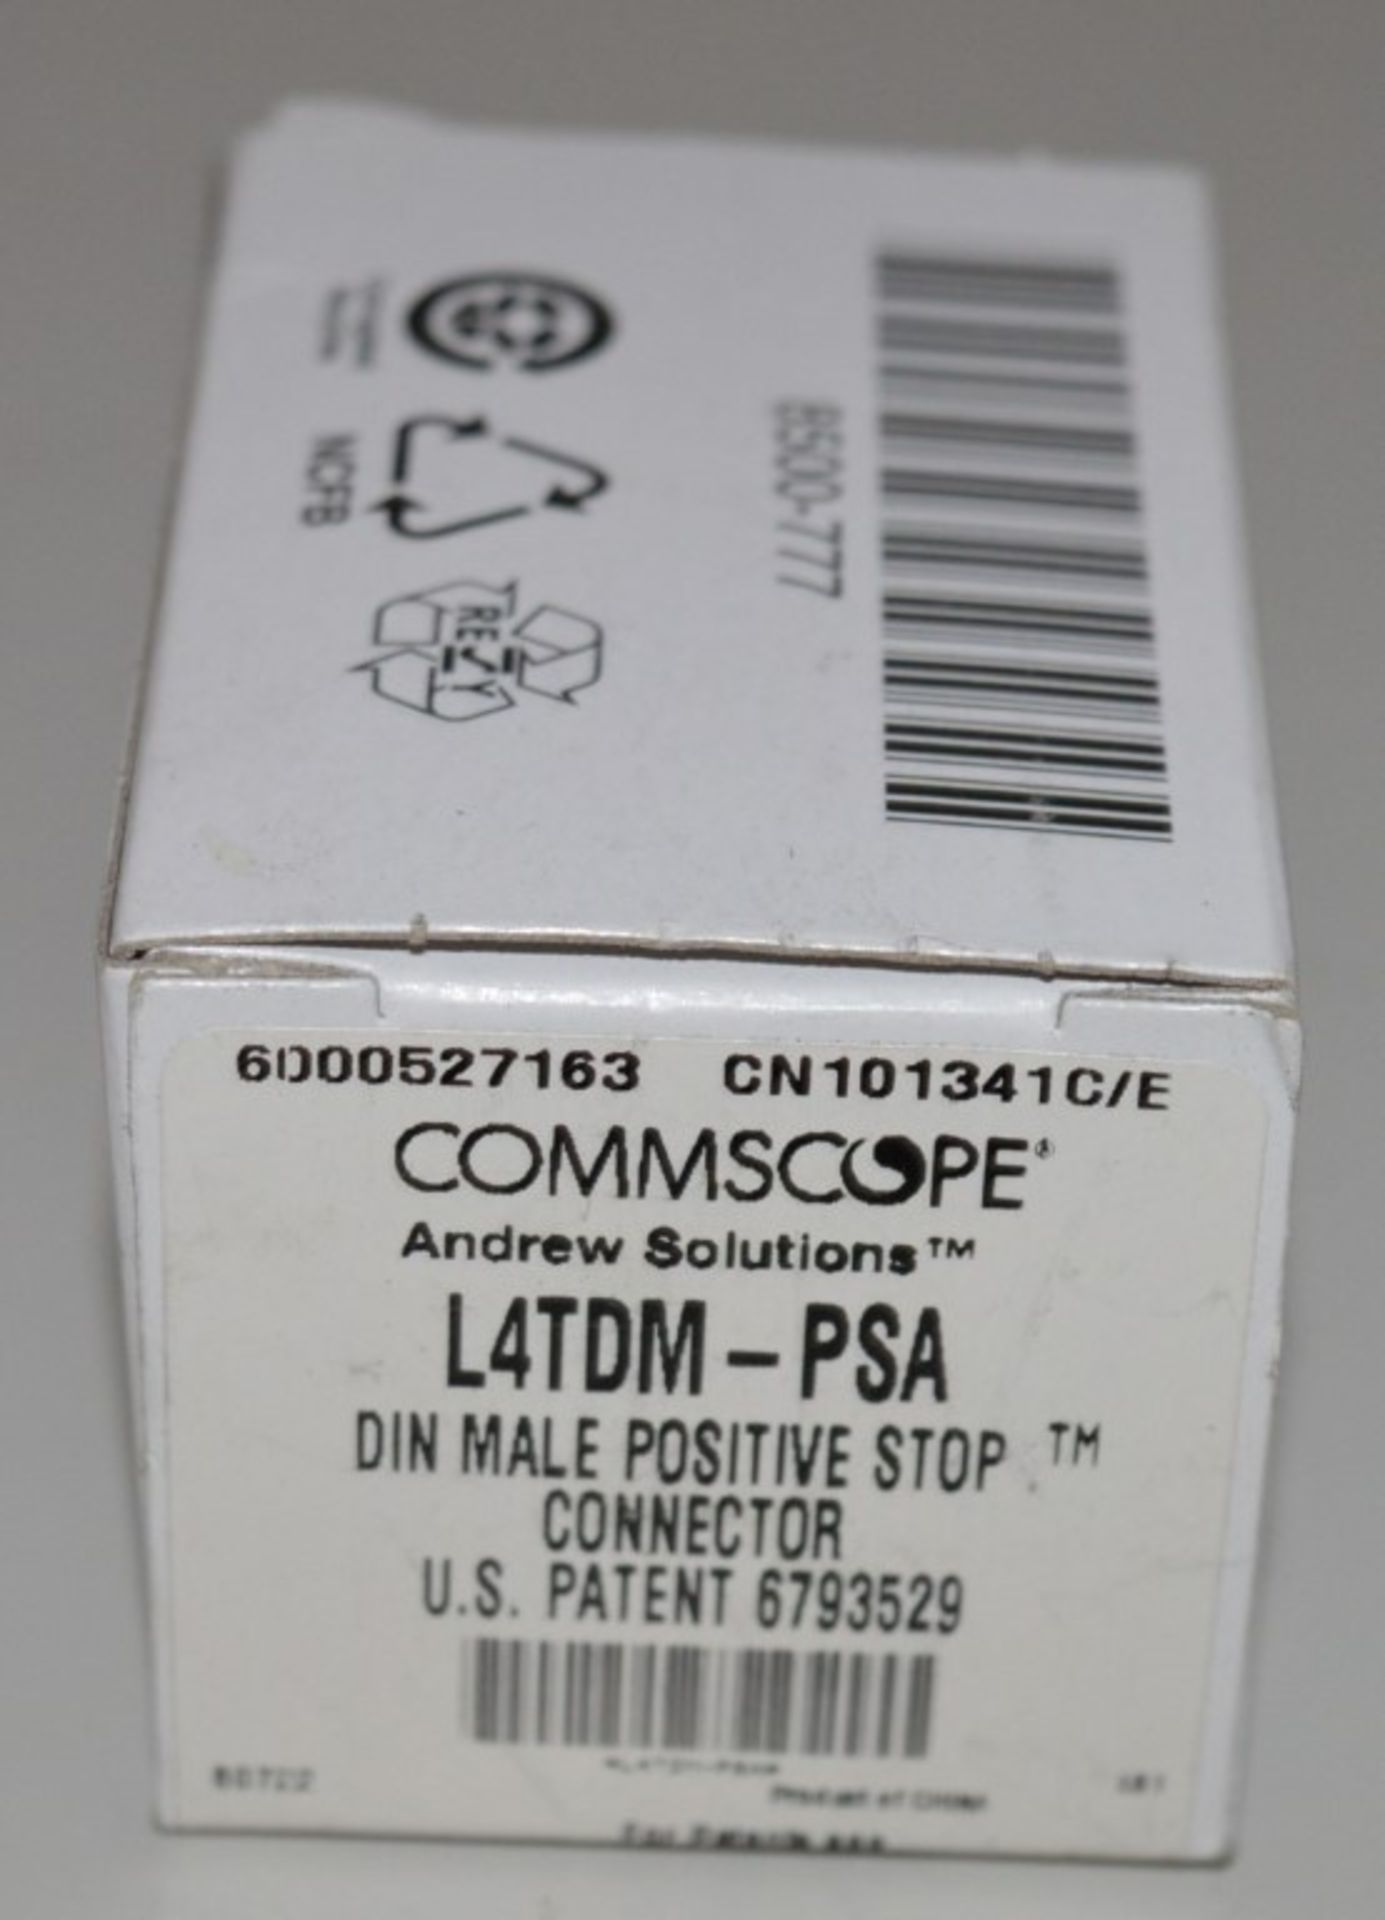 18 x Commscope L4TDM-PSA Din Male Positive Stop Connectors - Andrew Solutions - Brand New Boxed - Image 7 of 8